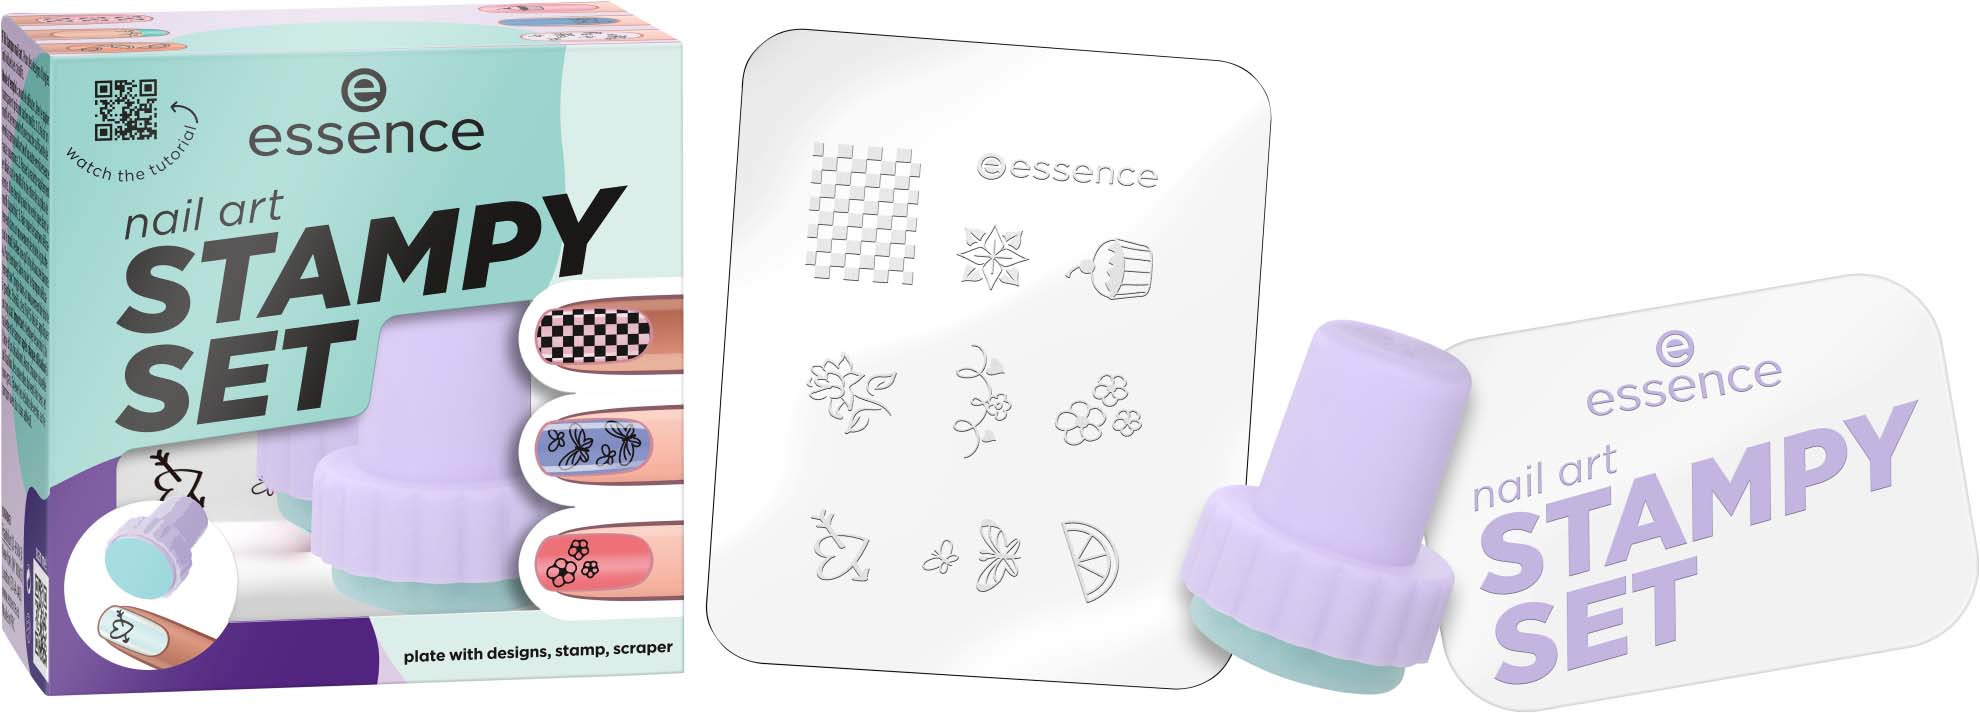 Essence Stamp It! Clear Stampy Set - Nails